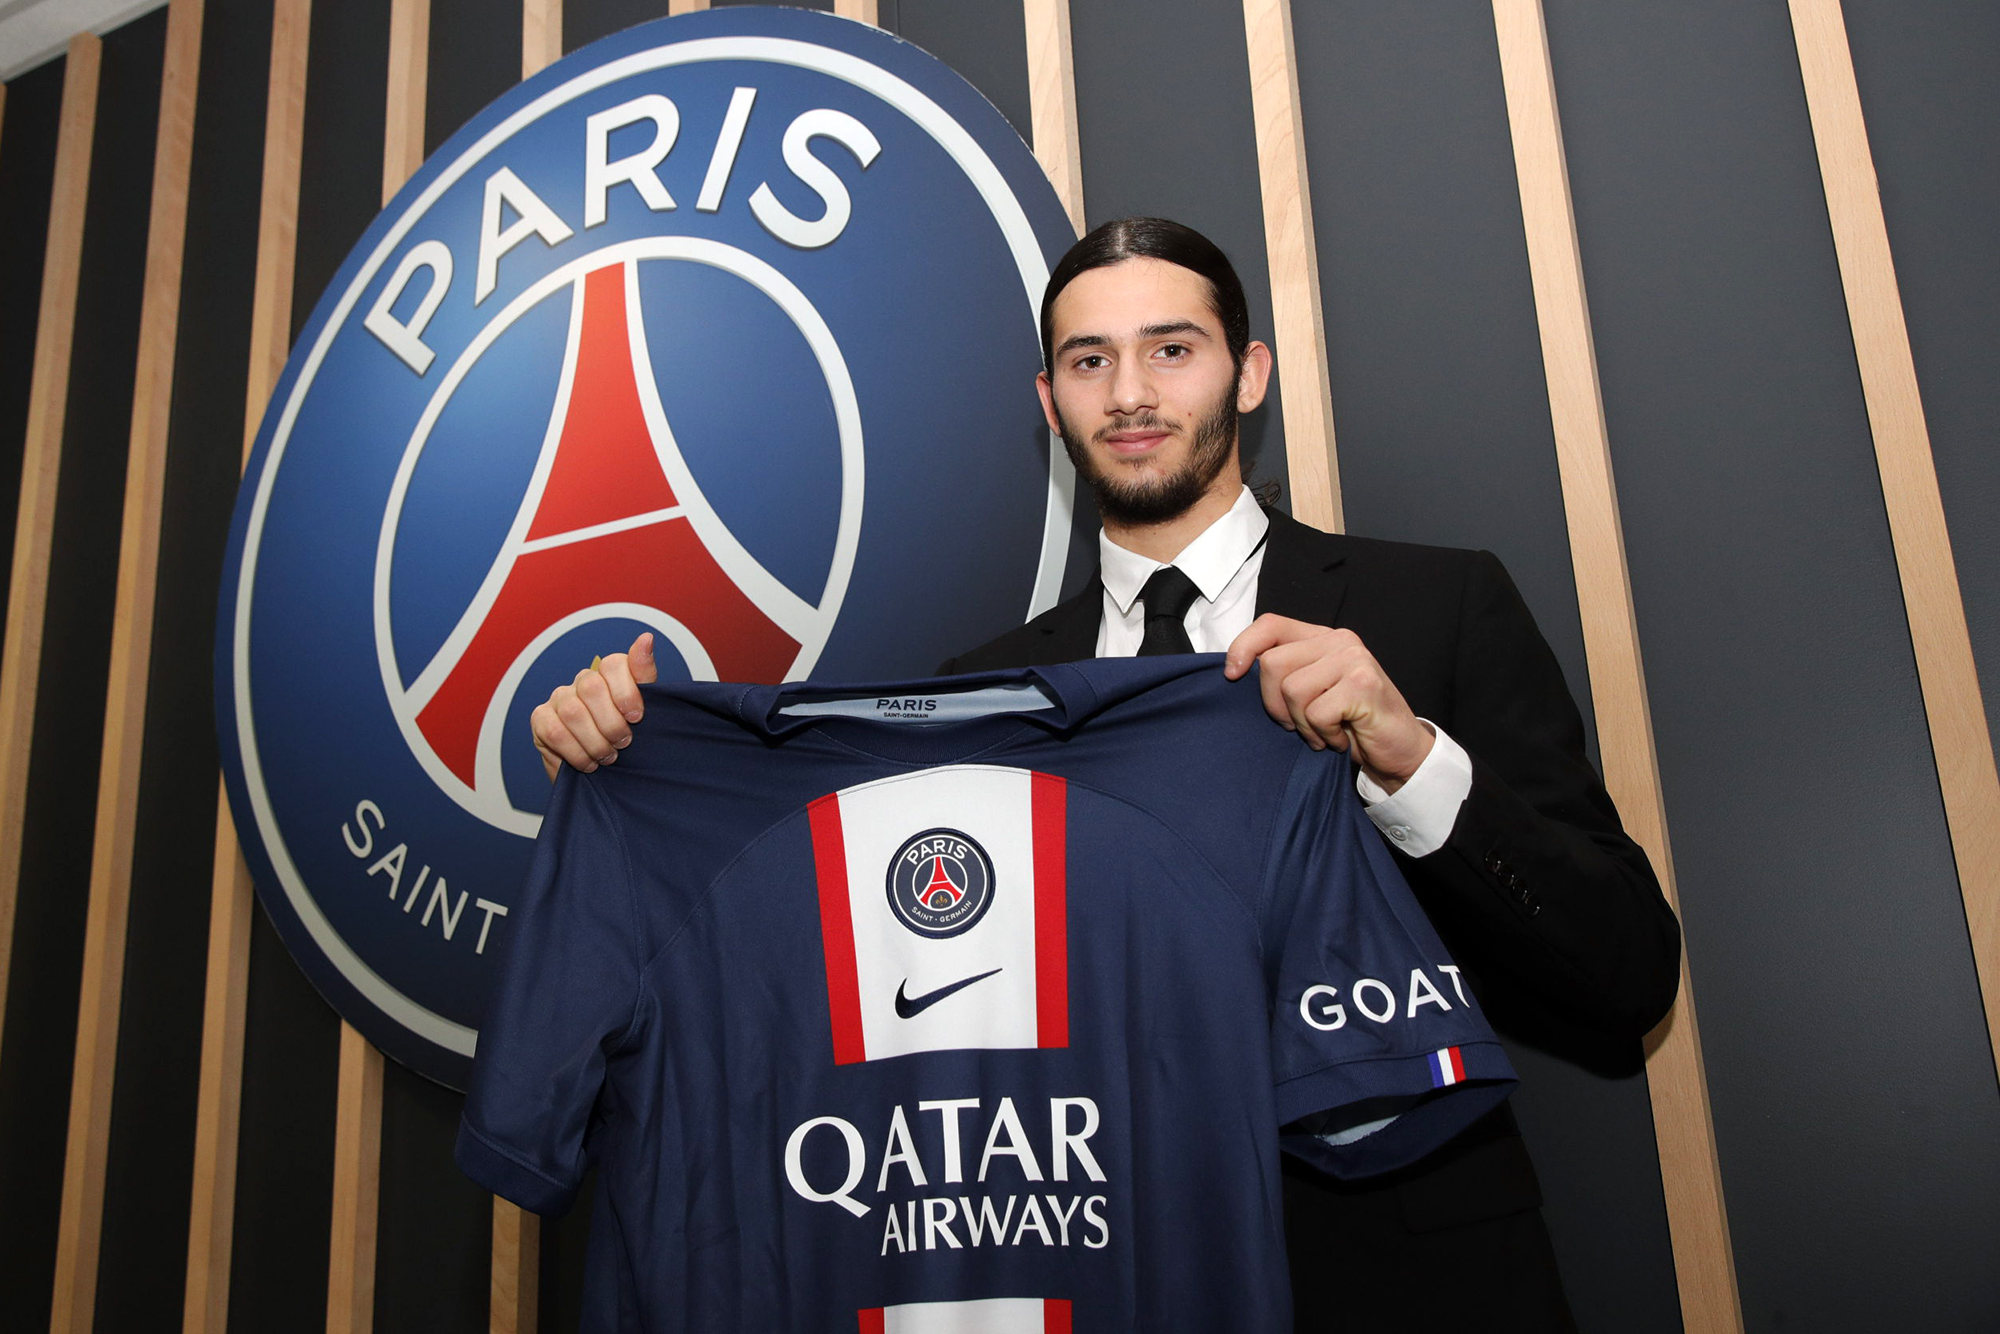 Ilyes Housni signs his first professional contract | Paris Saint-Germain